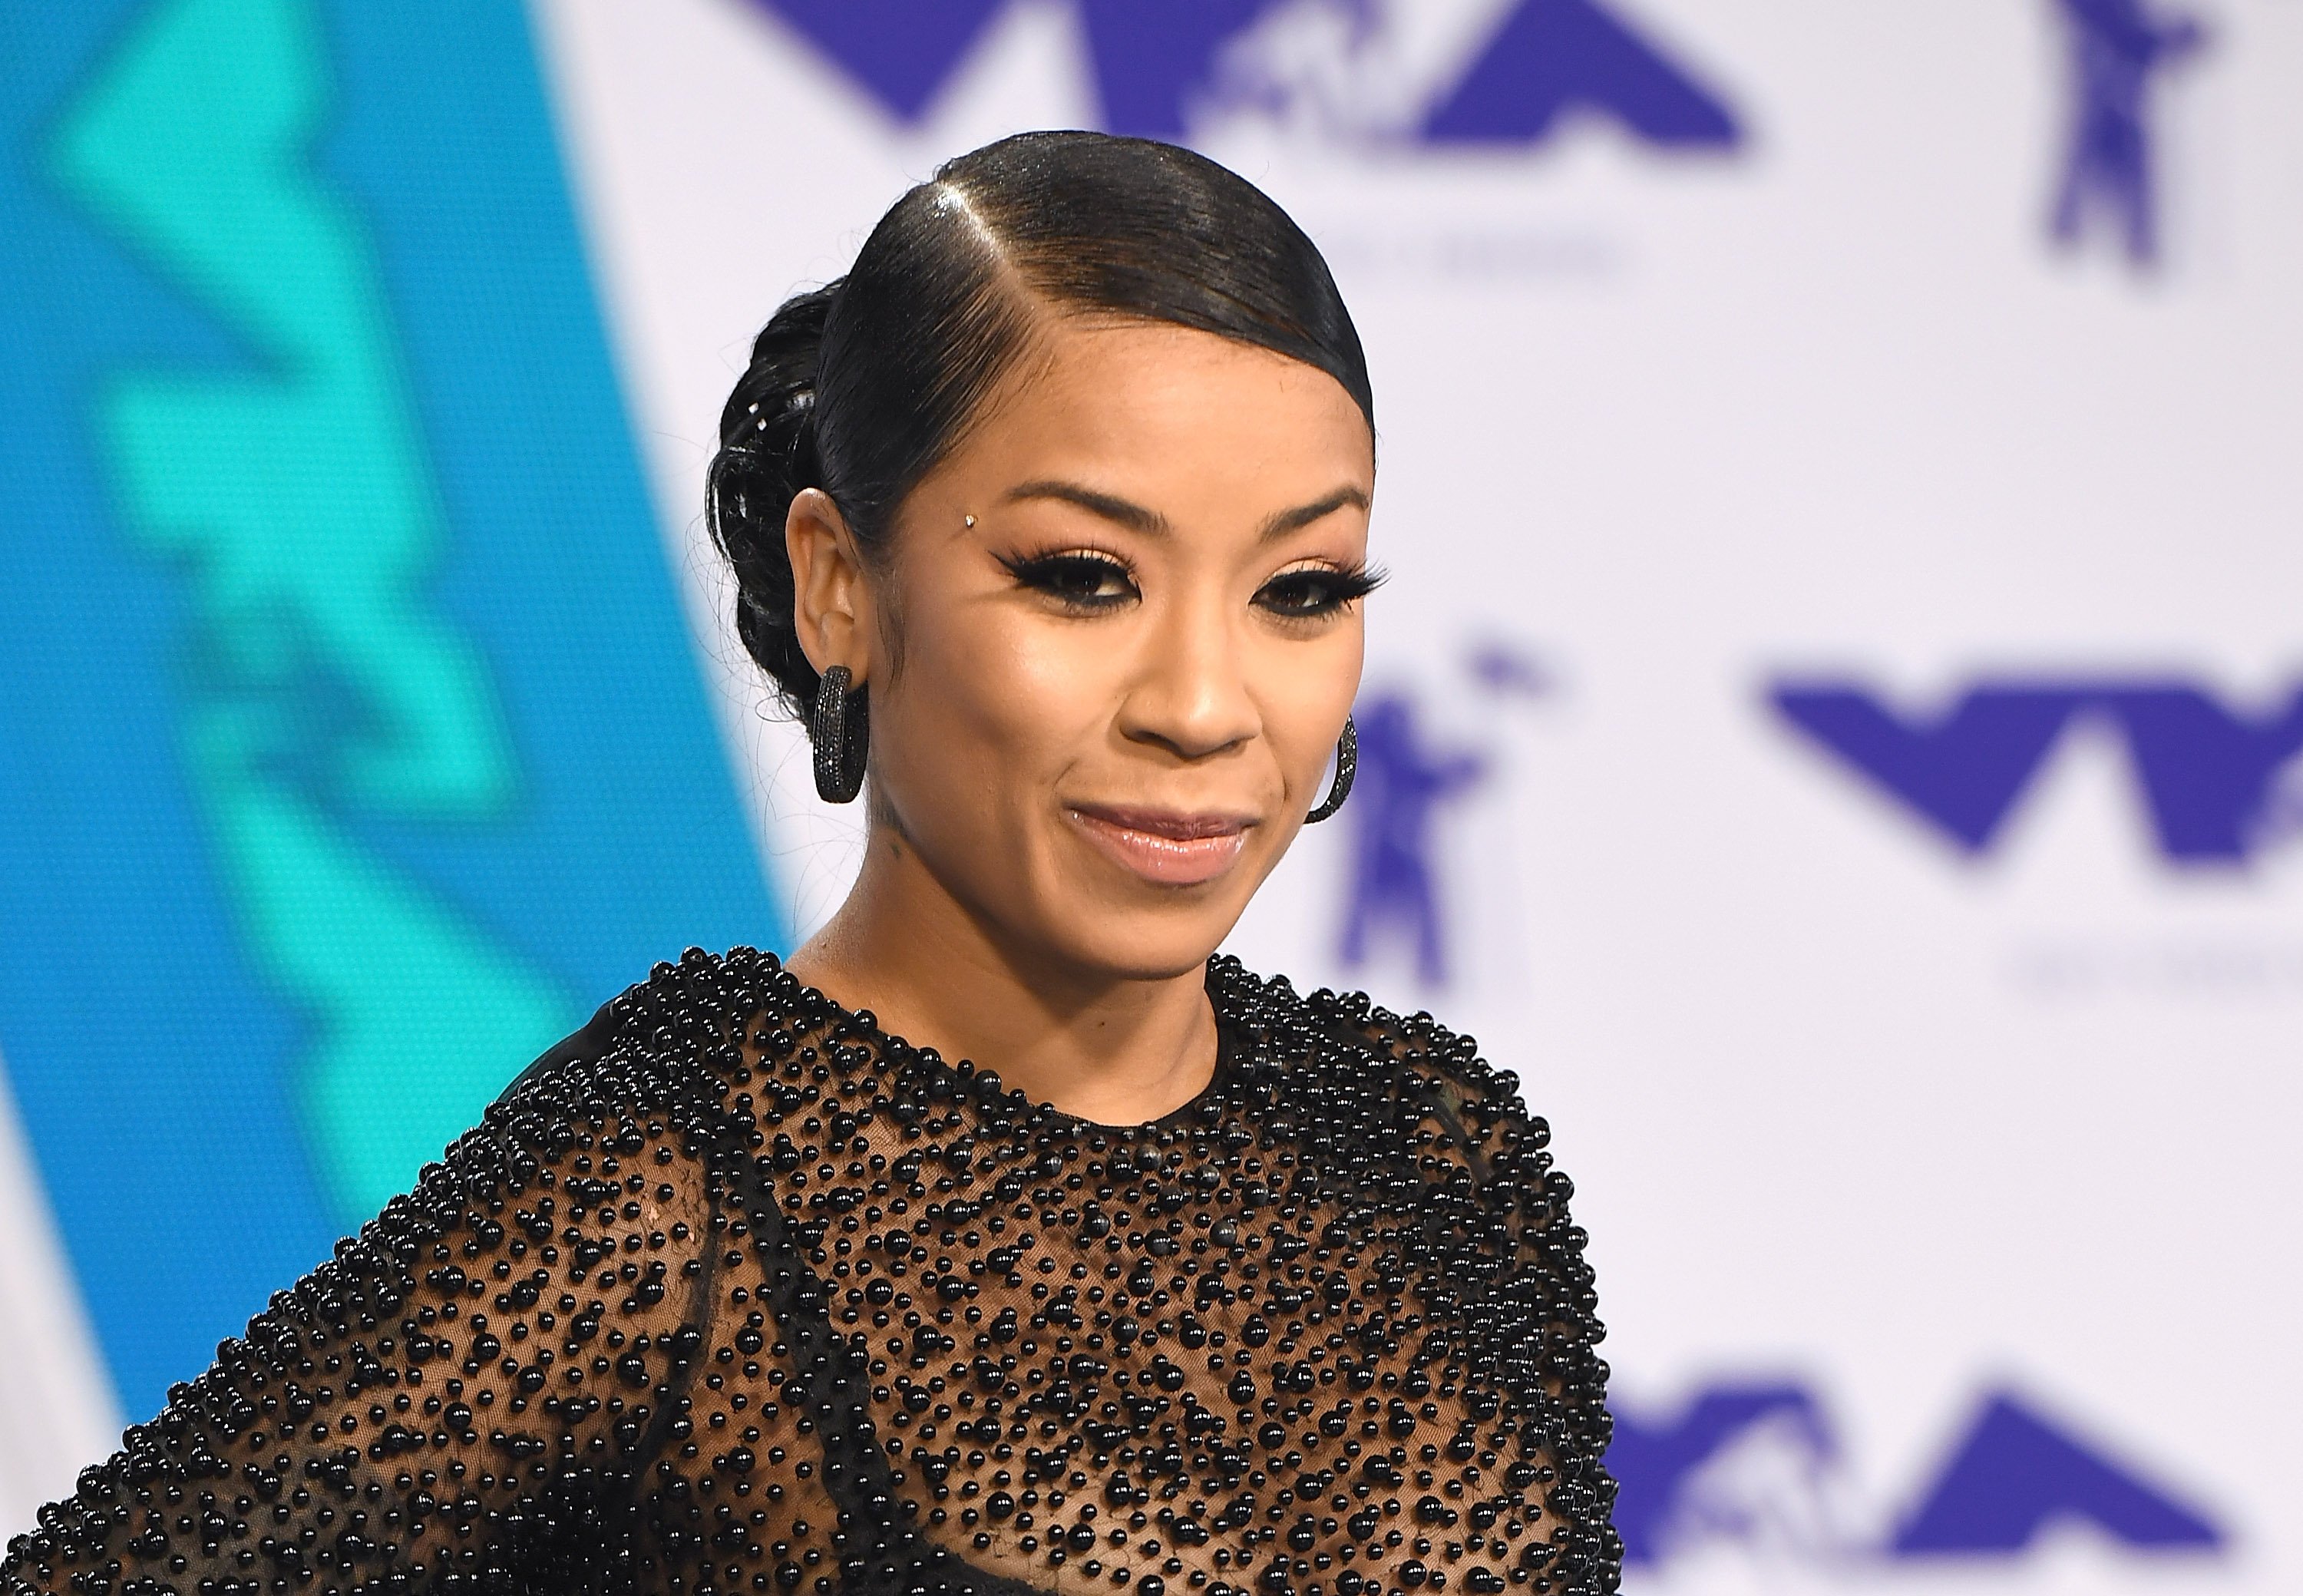 Keyshia Cole at the 2017 MTV Video Music Awards on Aug. 27, 2017 in California | Photo: Getty Images